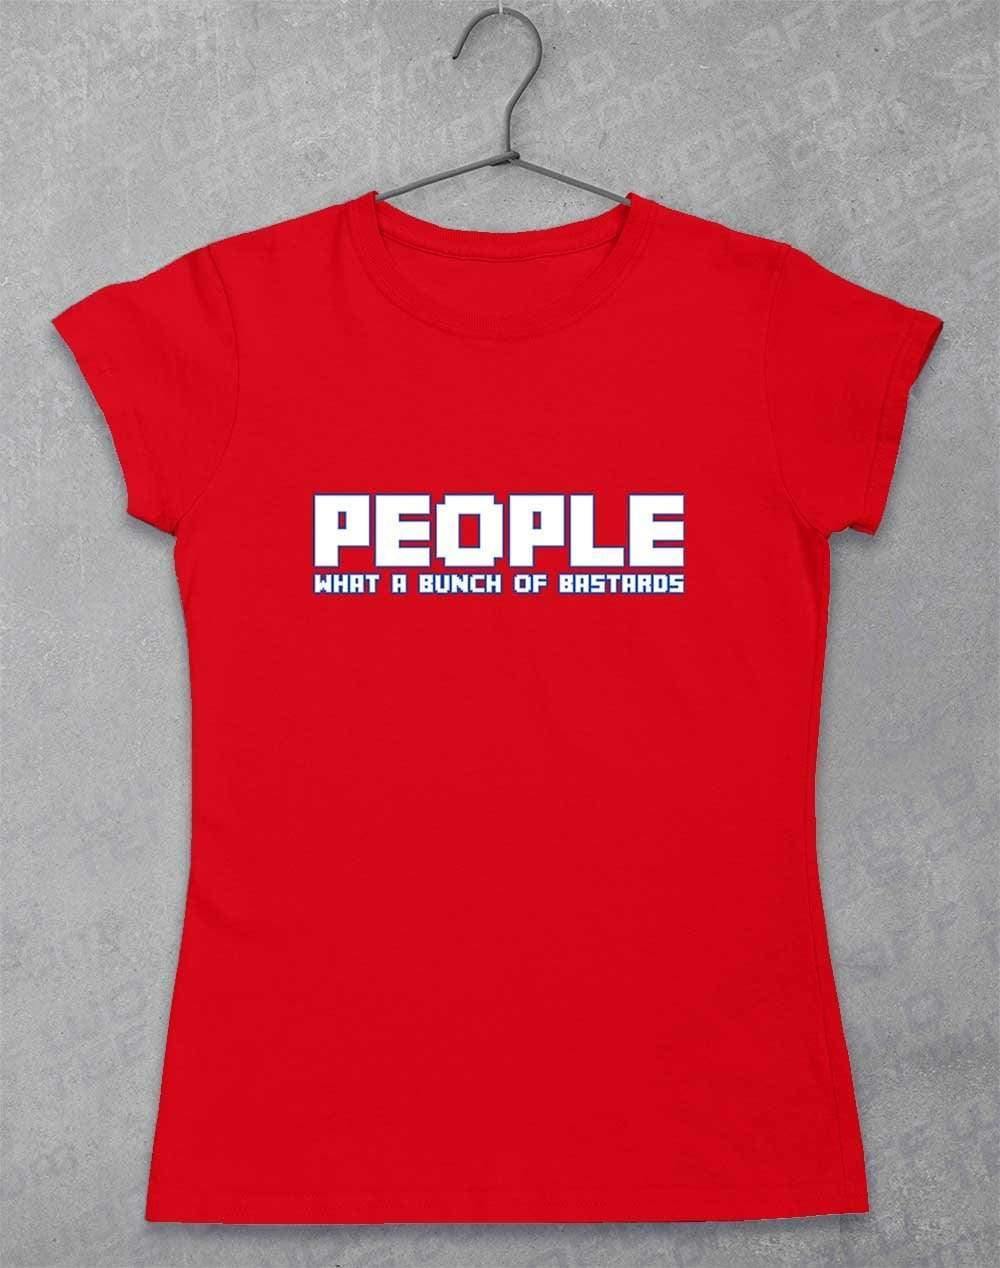 People = Bastards Women's T-Shirt 8-10 / Red  - Off World Tees